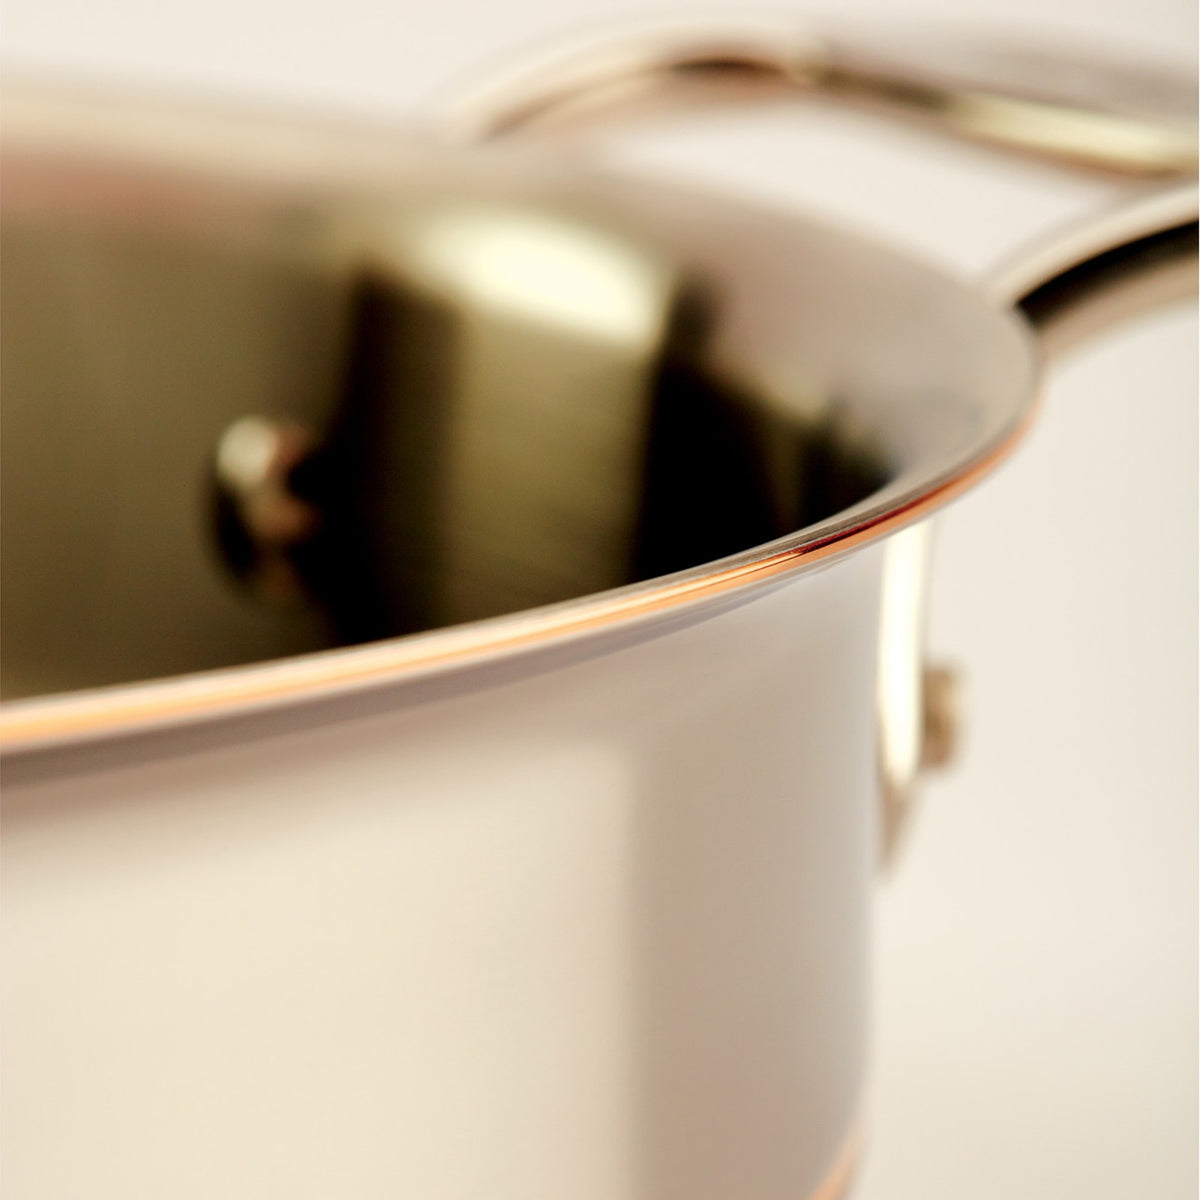 All-Clad Copper Core 2-qt Saucepan with lid and Porcelain Double Boile –  Capital Cookware